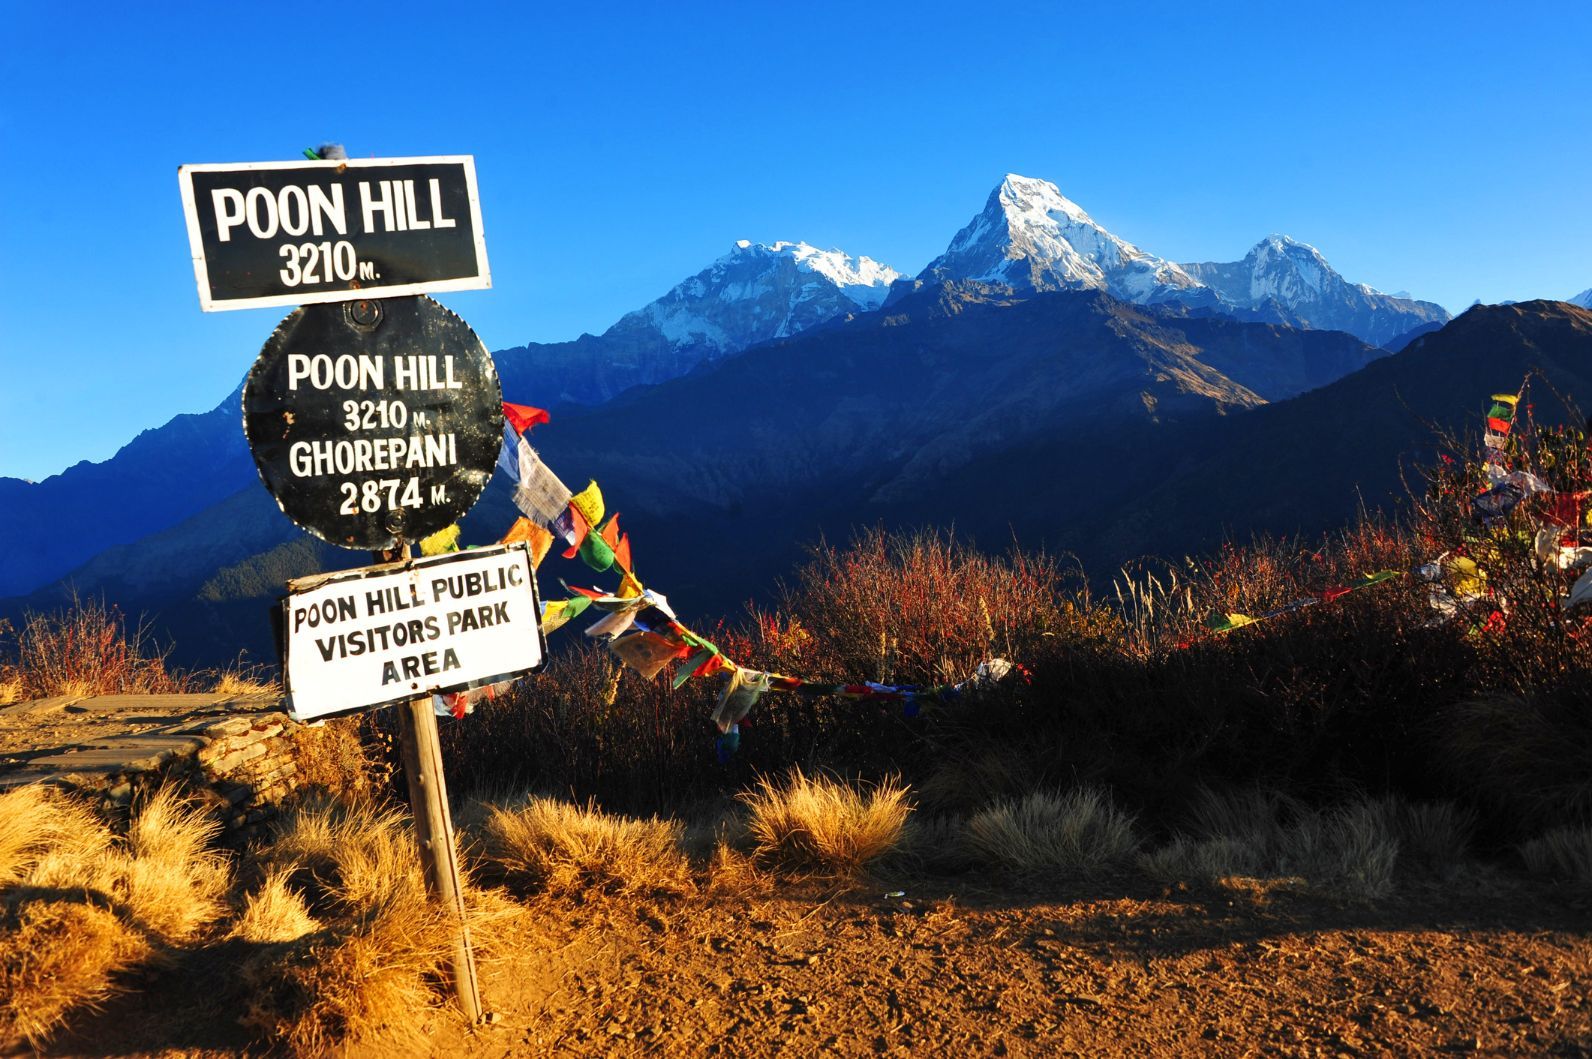 A beautiful view of the mesmeric Annapurna South from Poon Hill in morning, with the Poon Hill sign in the foreground.